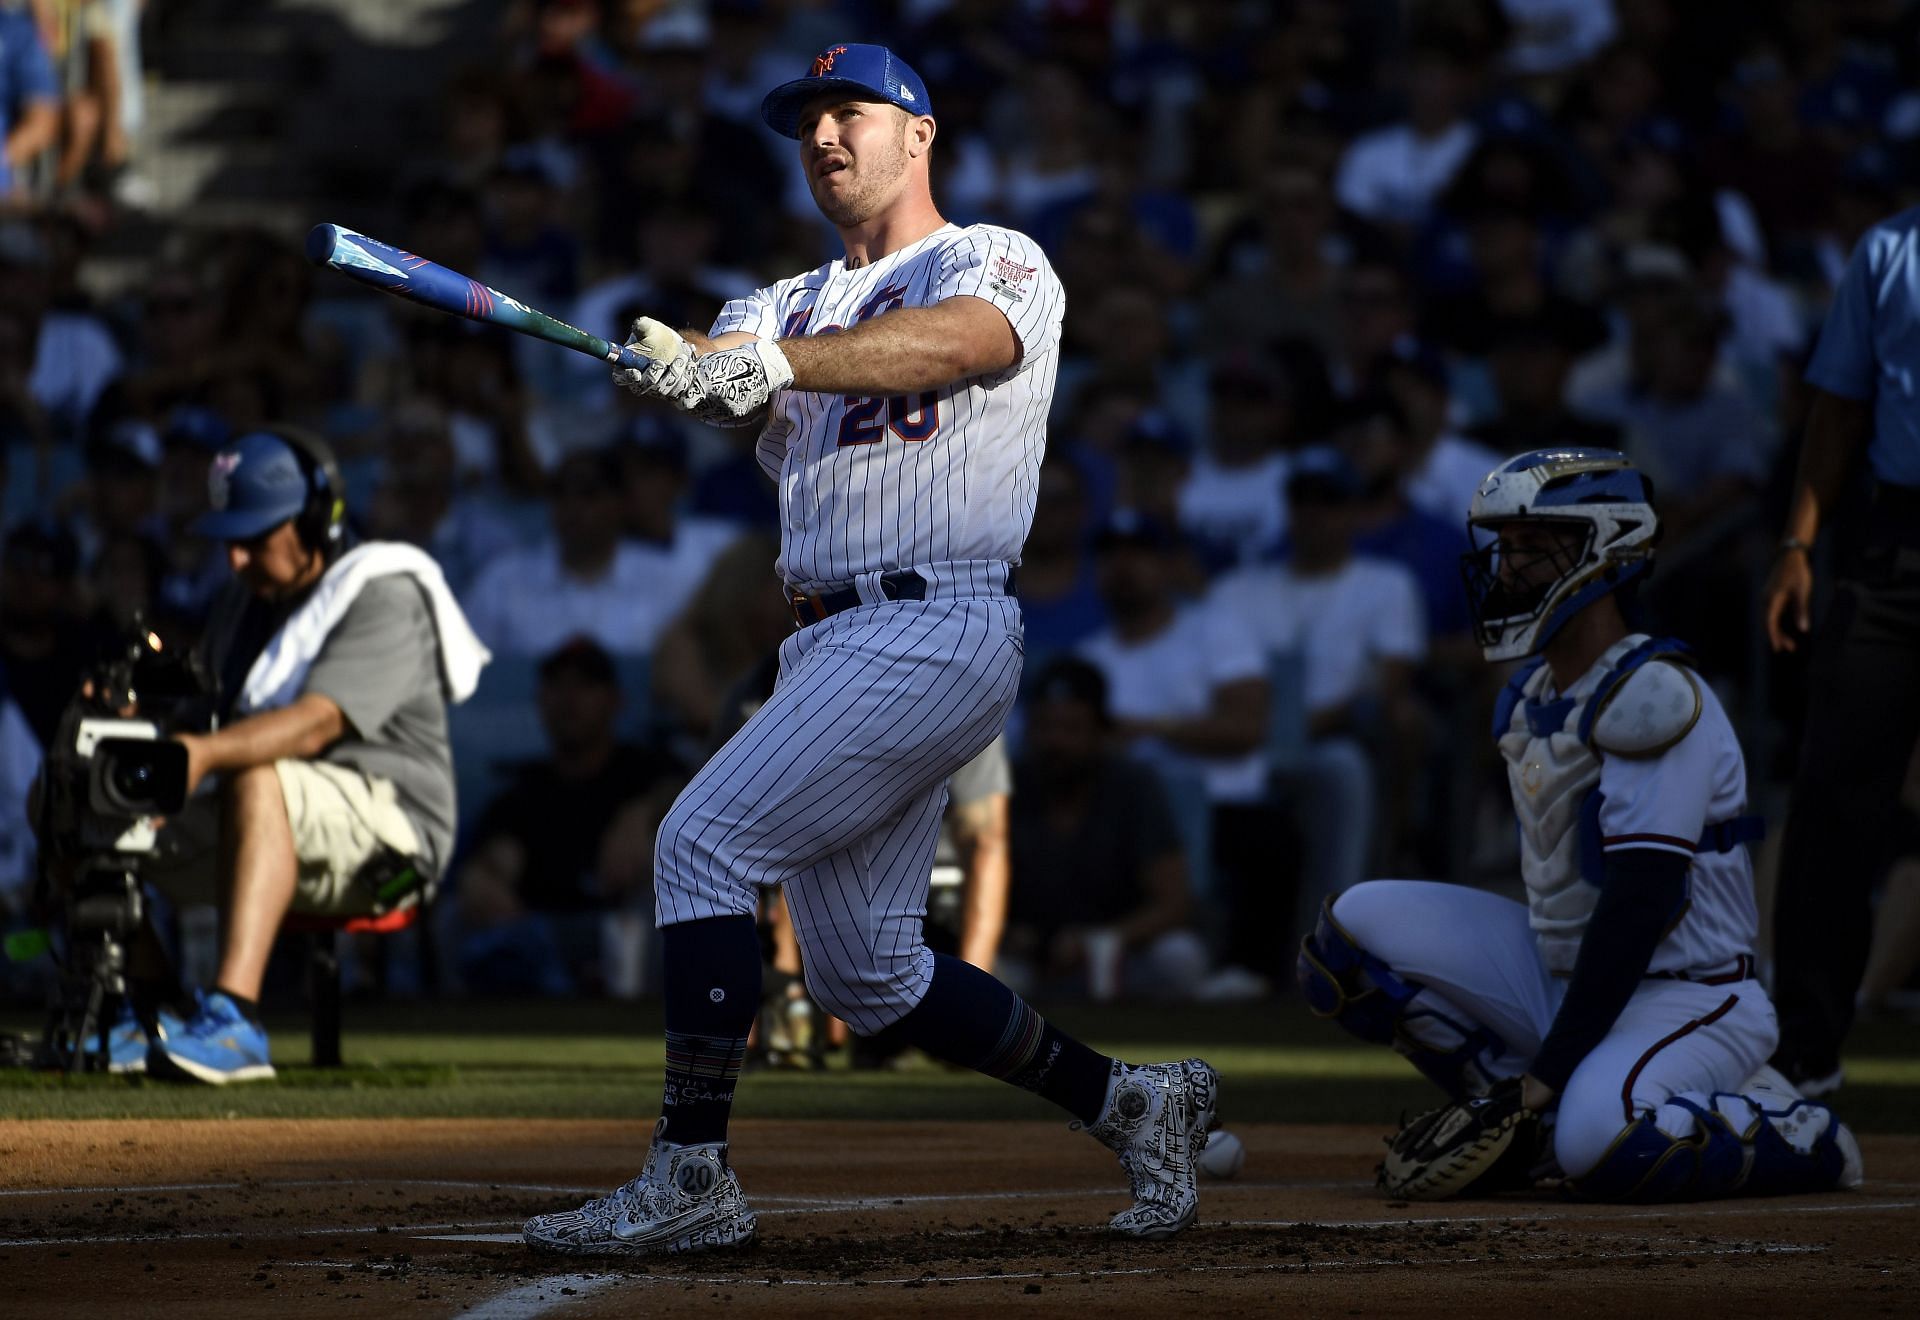 New York Mets: Pete Alonso's mic'd up by ESPN, big personality on